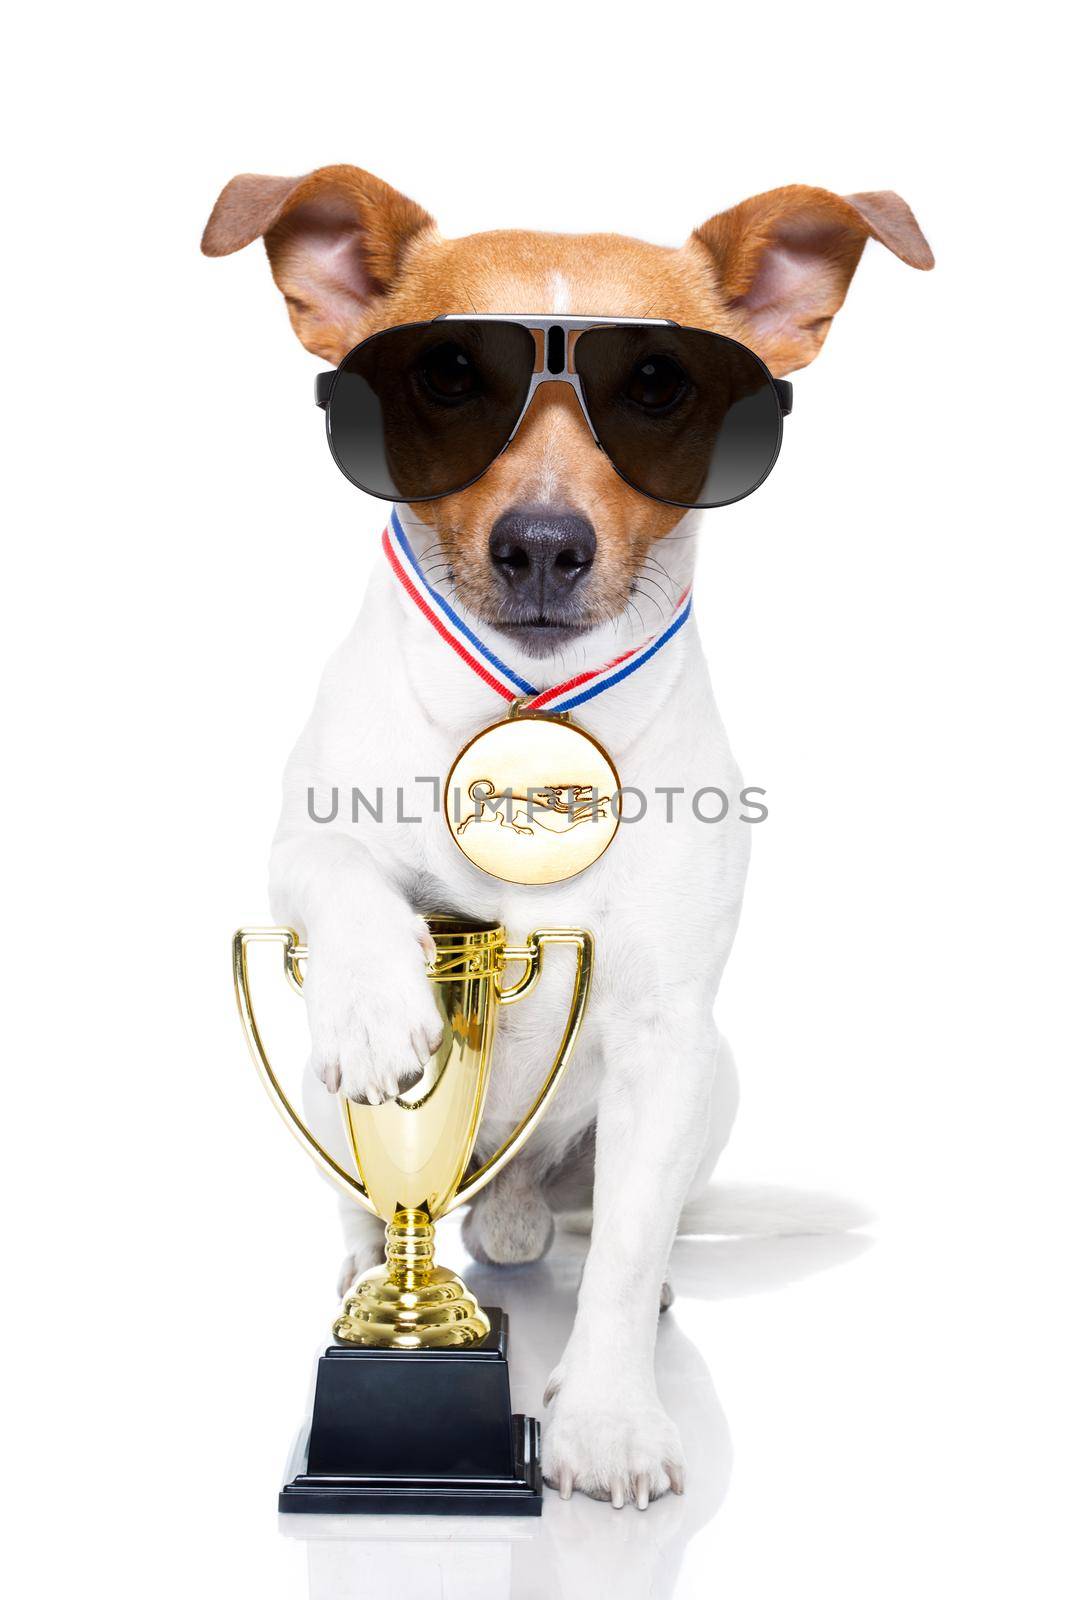 jack russell dog with  a golden winner trophy holding with paw, isolated on white background, wearing sunglasses